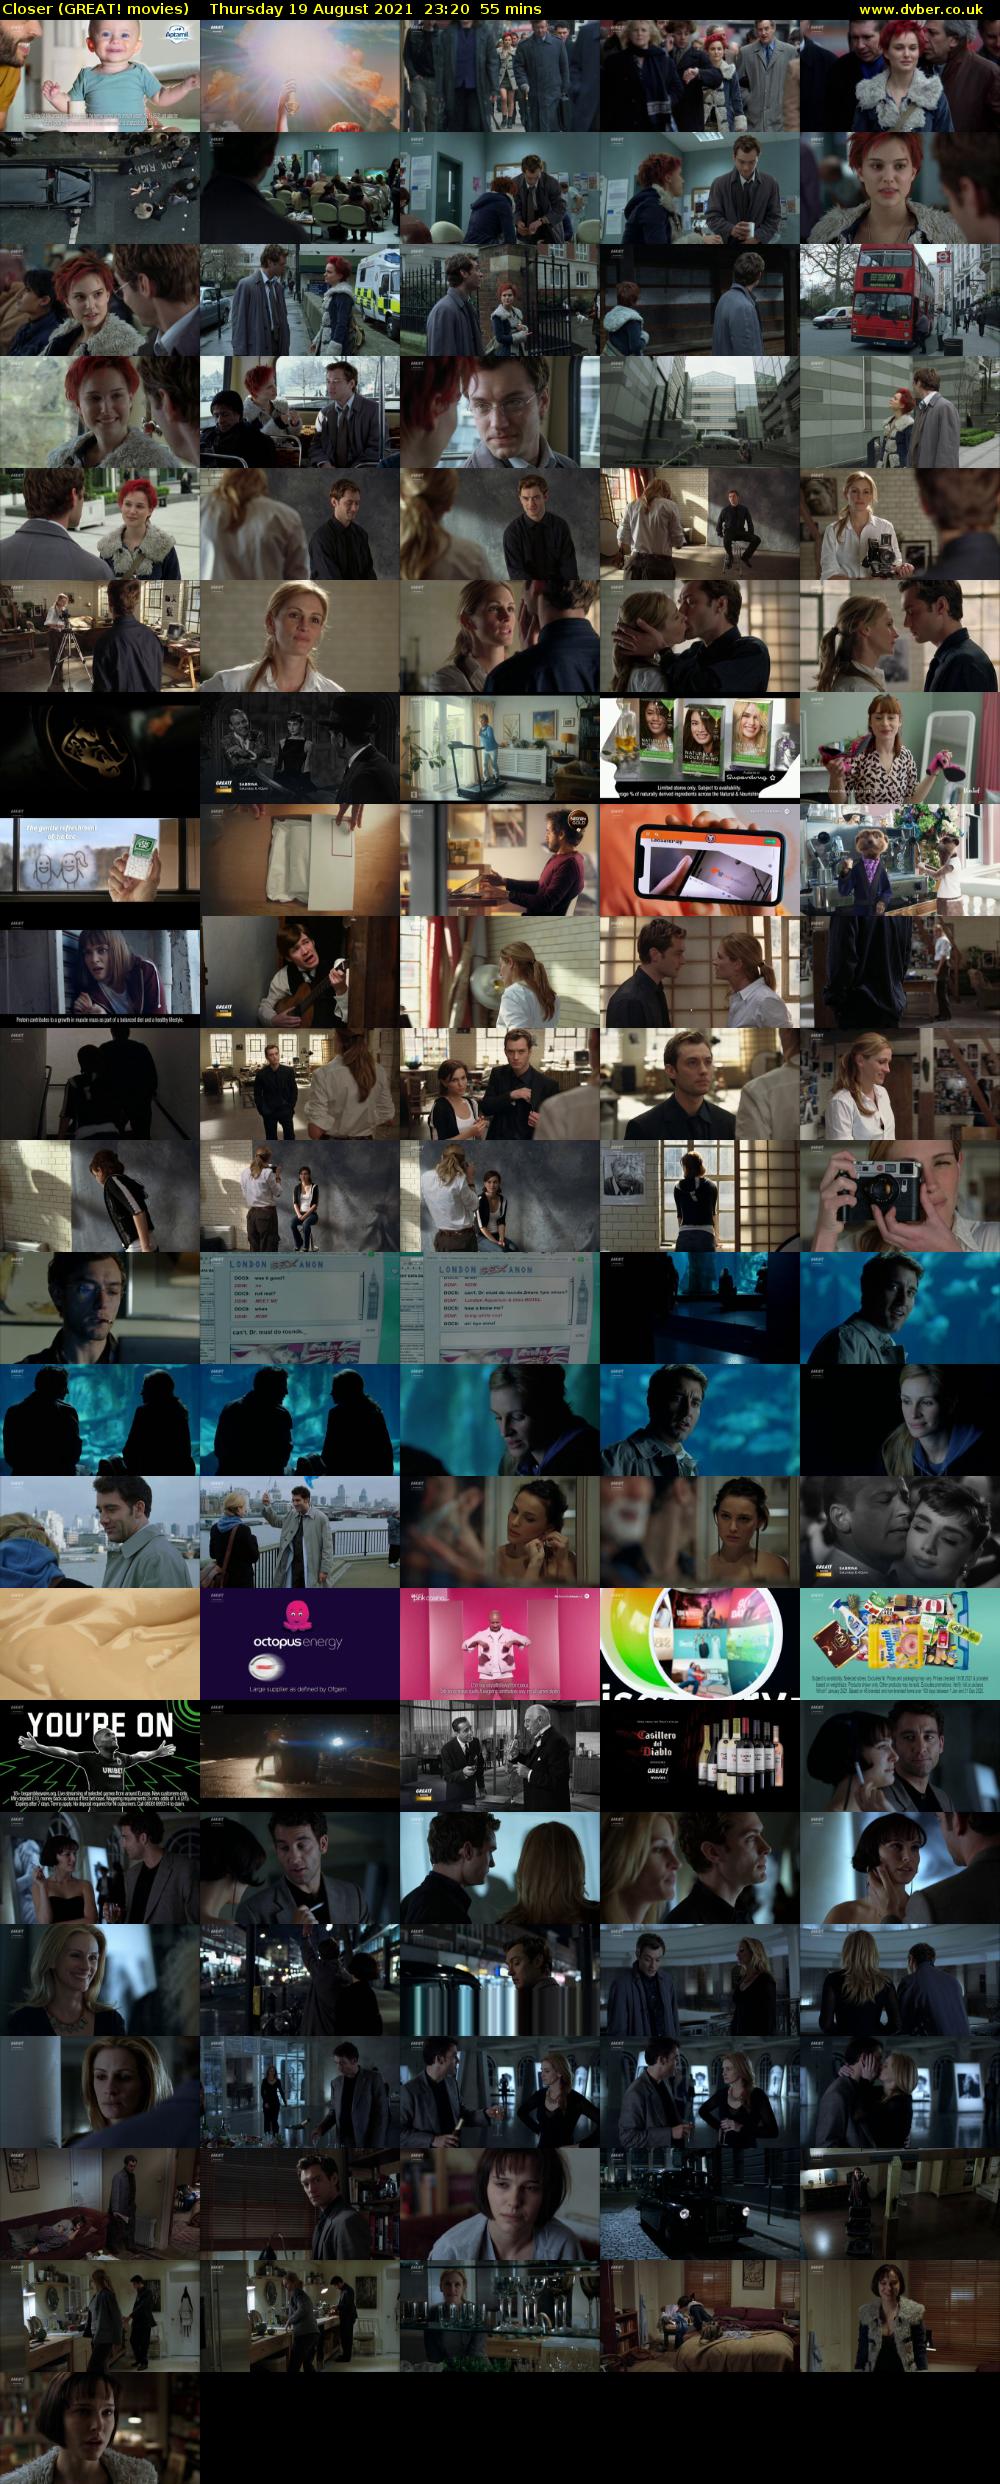 Closer (GREAT! movies) Thursday 19 August 2021 23:20 - 00:15